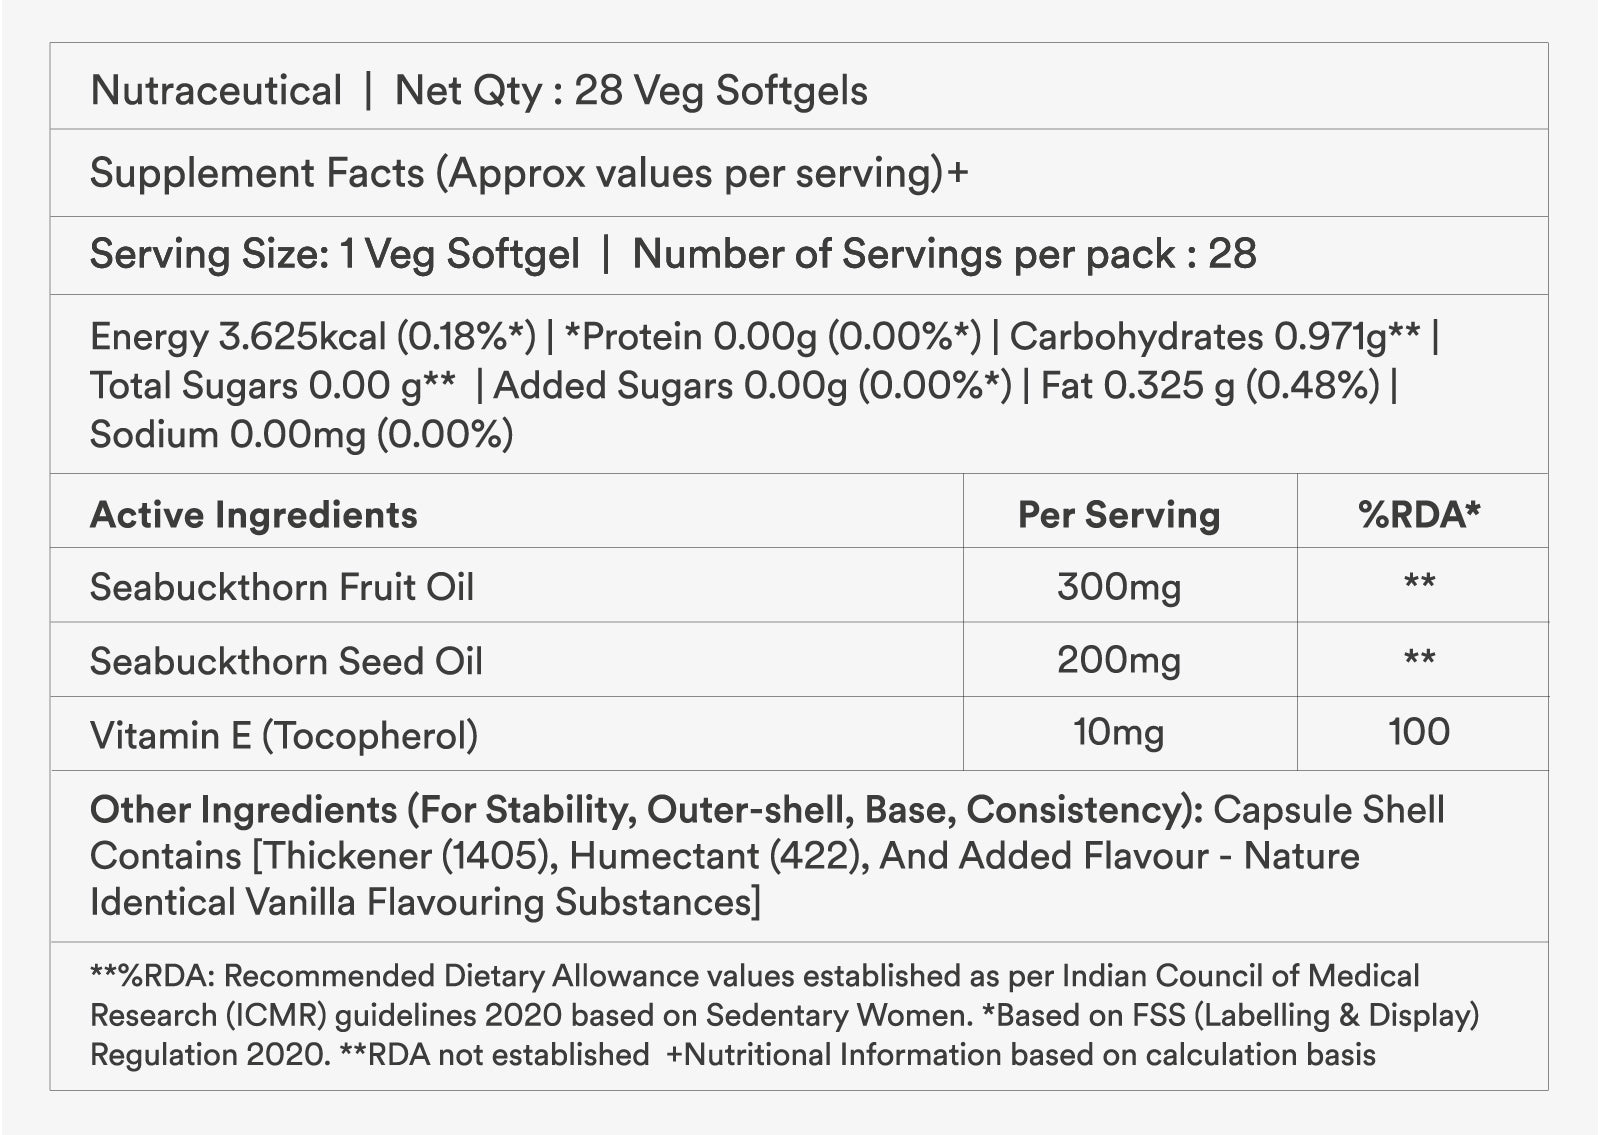 supplement facts and active ingredients table of sea buckthorn oil softgel capsule